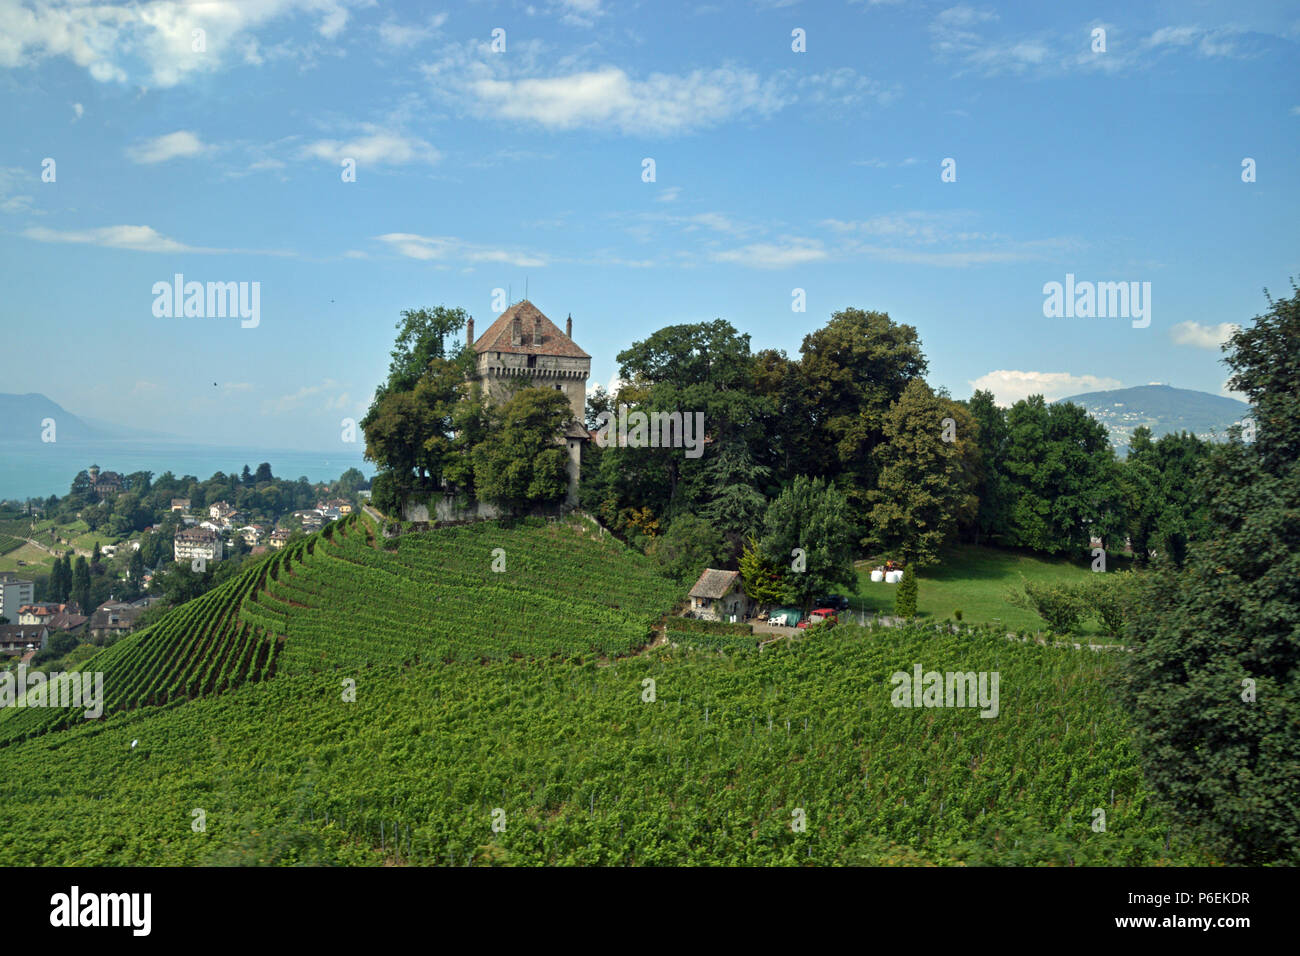 Vineyard in Montreux Stock Photo